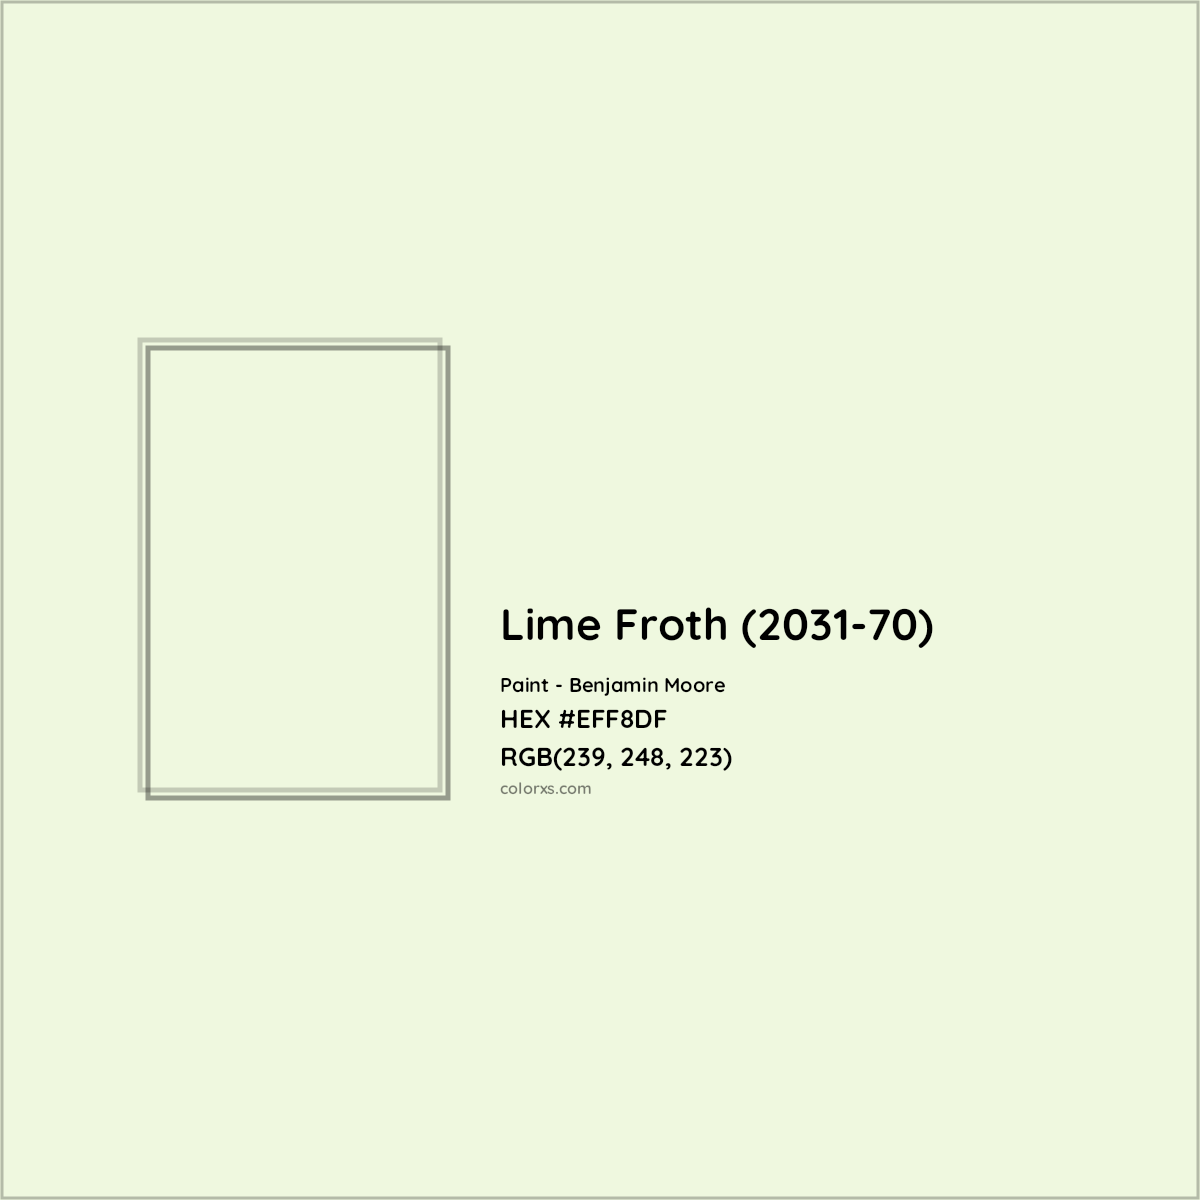 HEX #EFF8DF Lime Froth (2031-70) Paint Benjamin Moore - Color Code